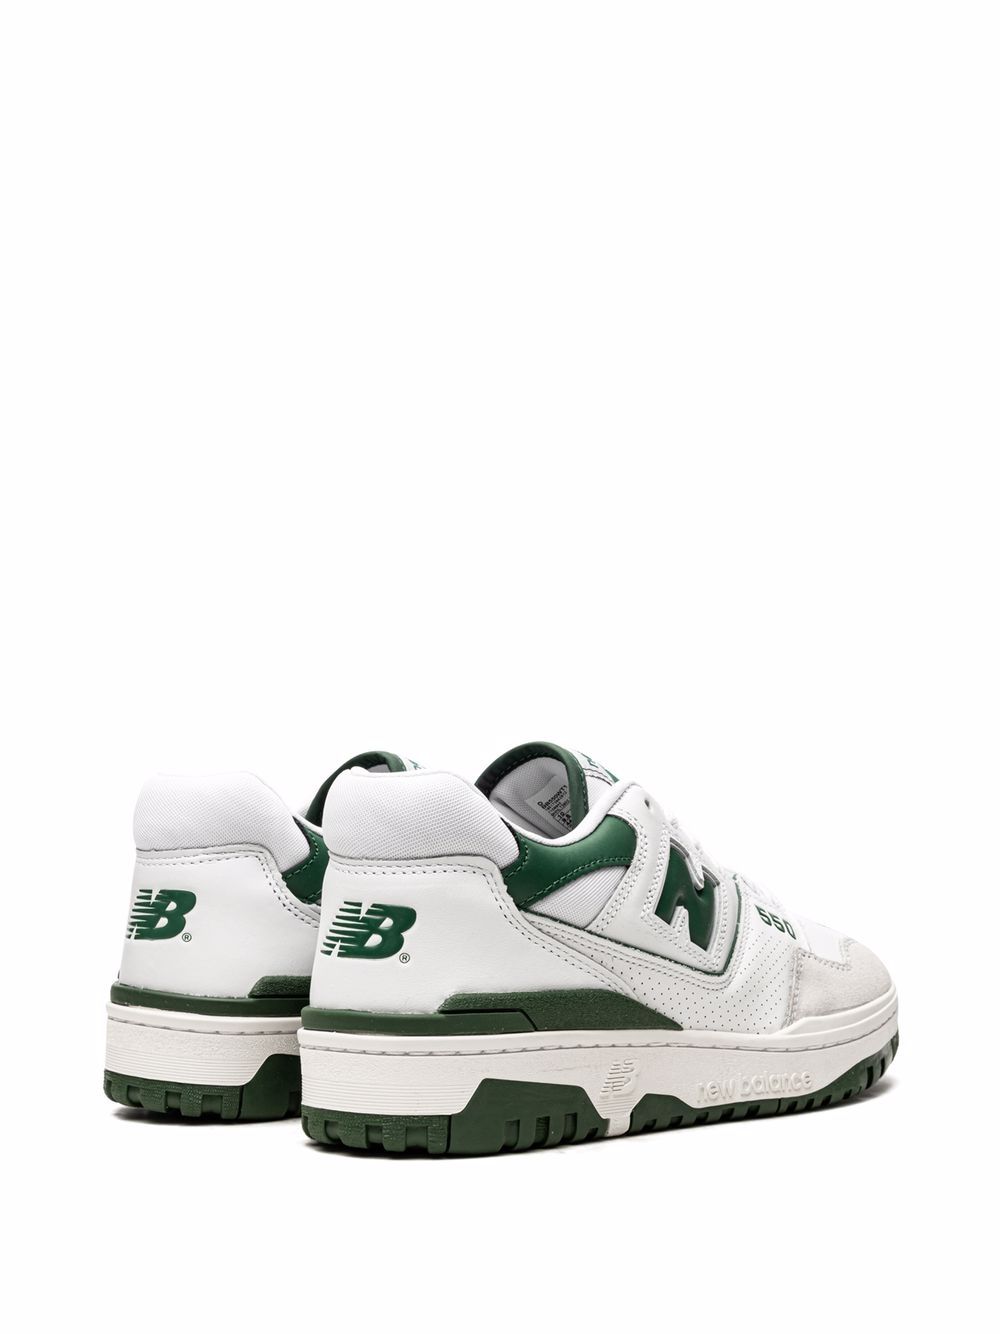  New Balance 550 white/team Forest Green Sneakers 